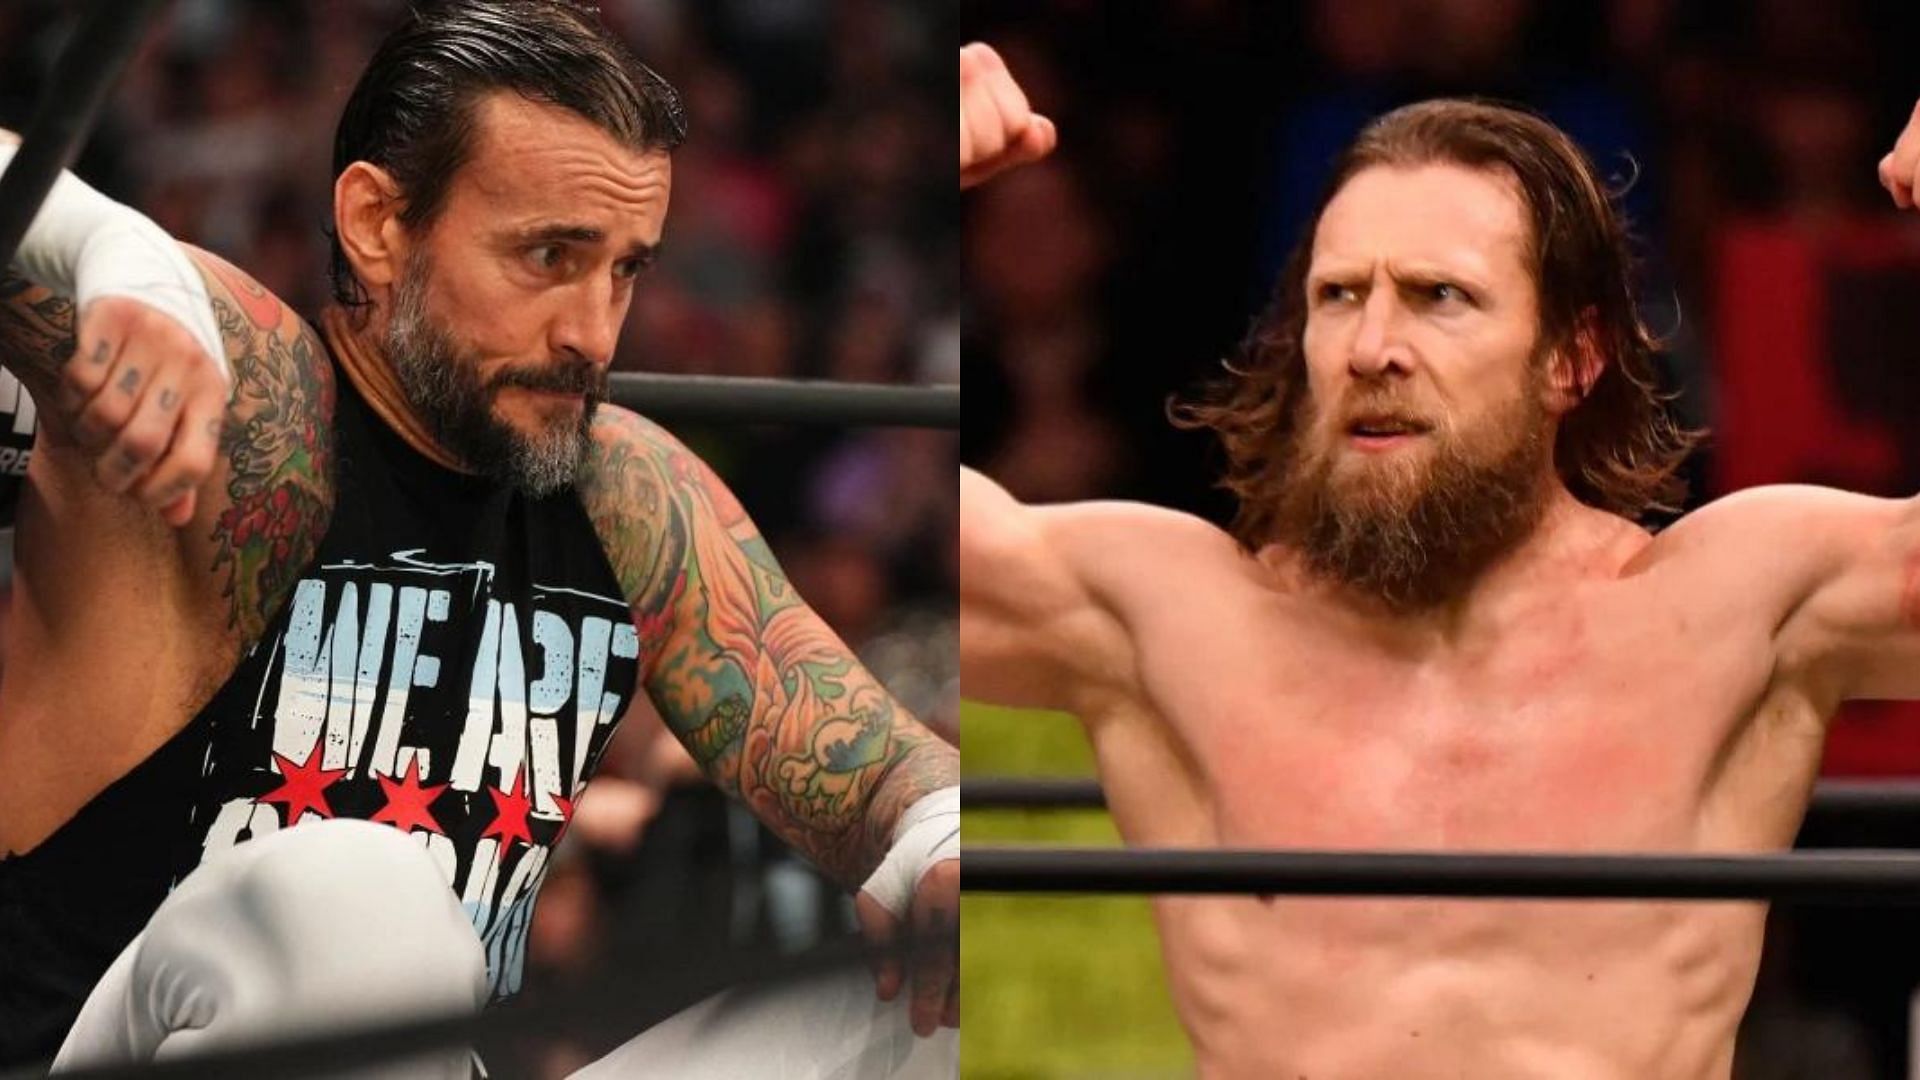 Bryan Danielson Has A Lot Of Respect For CM Punk, His AEW Departure Was A  Hard Situation - Wrestlezone